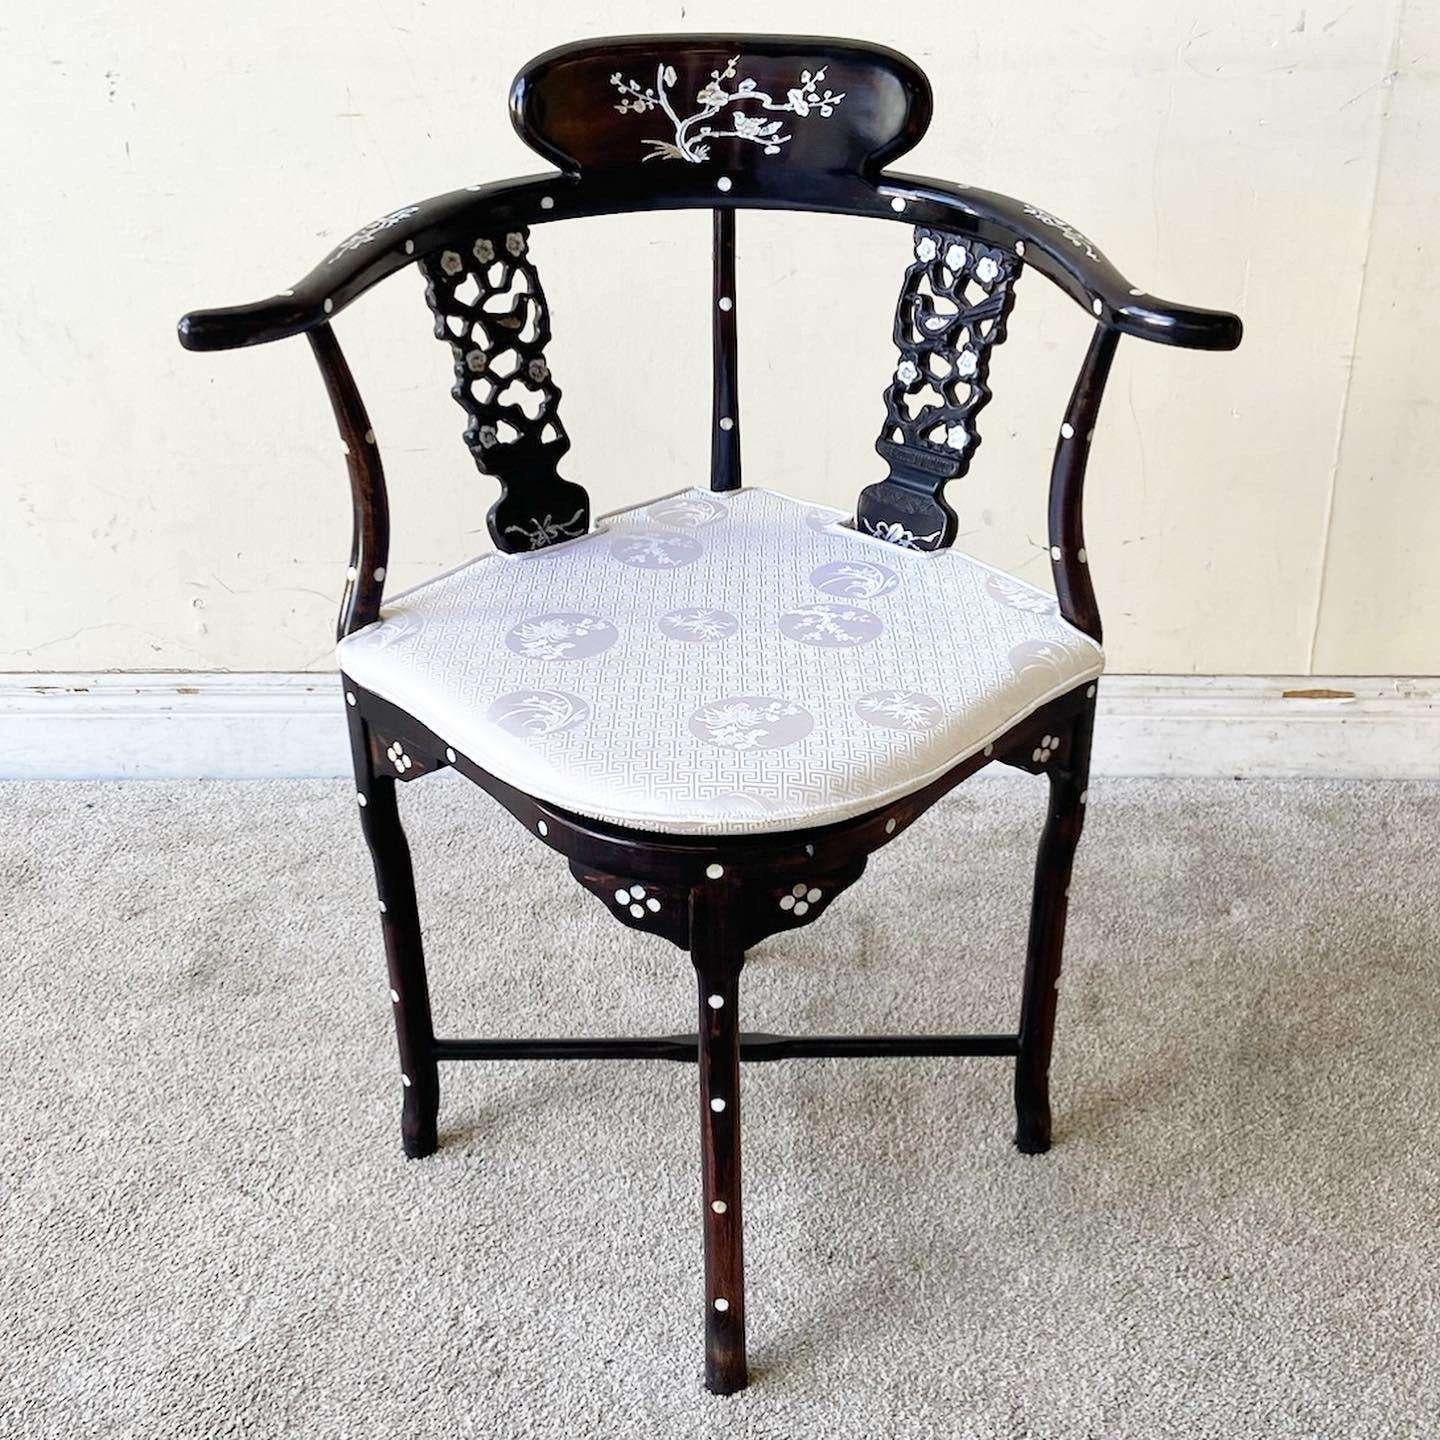 amazing vintage Chinese lacquered and hand carved corner chair. Features ornate and detailed mother of Pearl inlays.